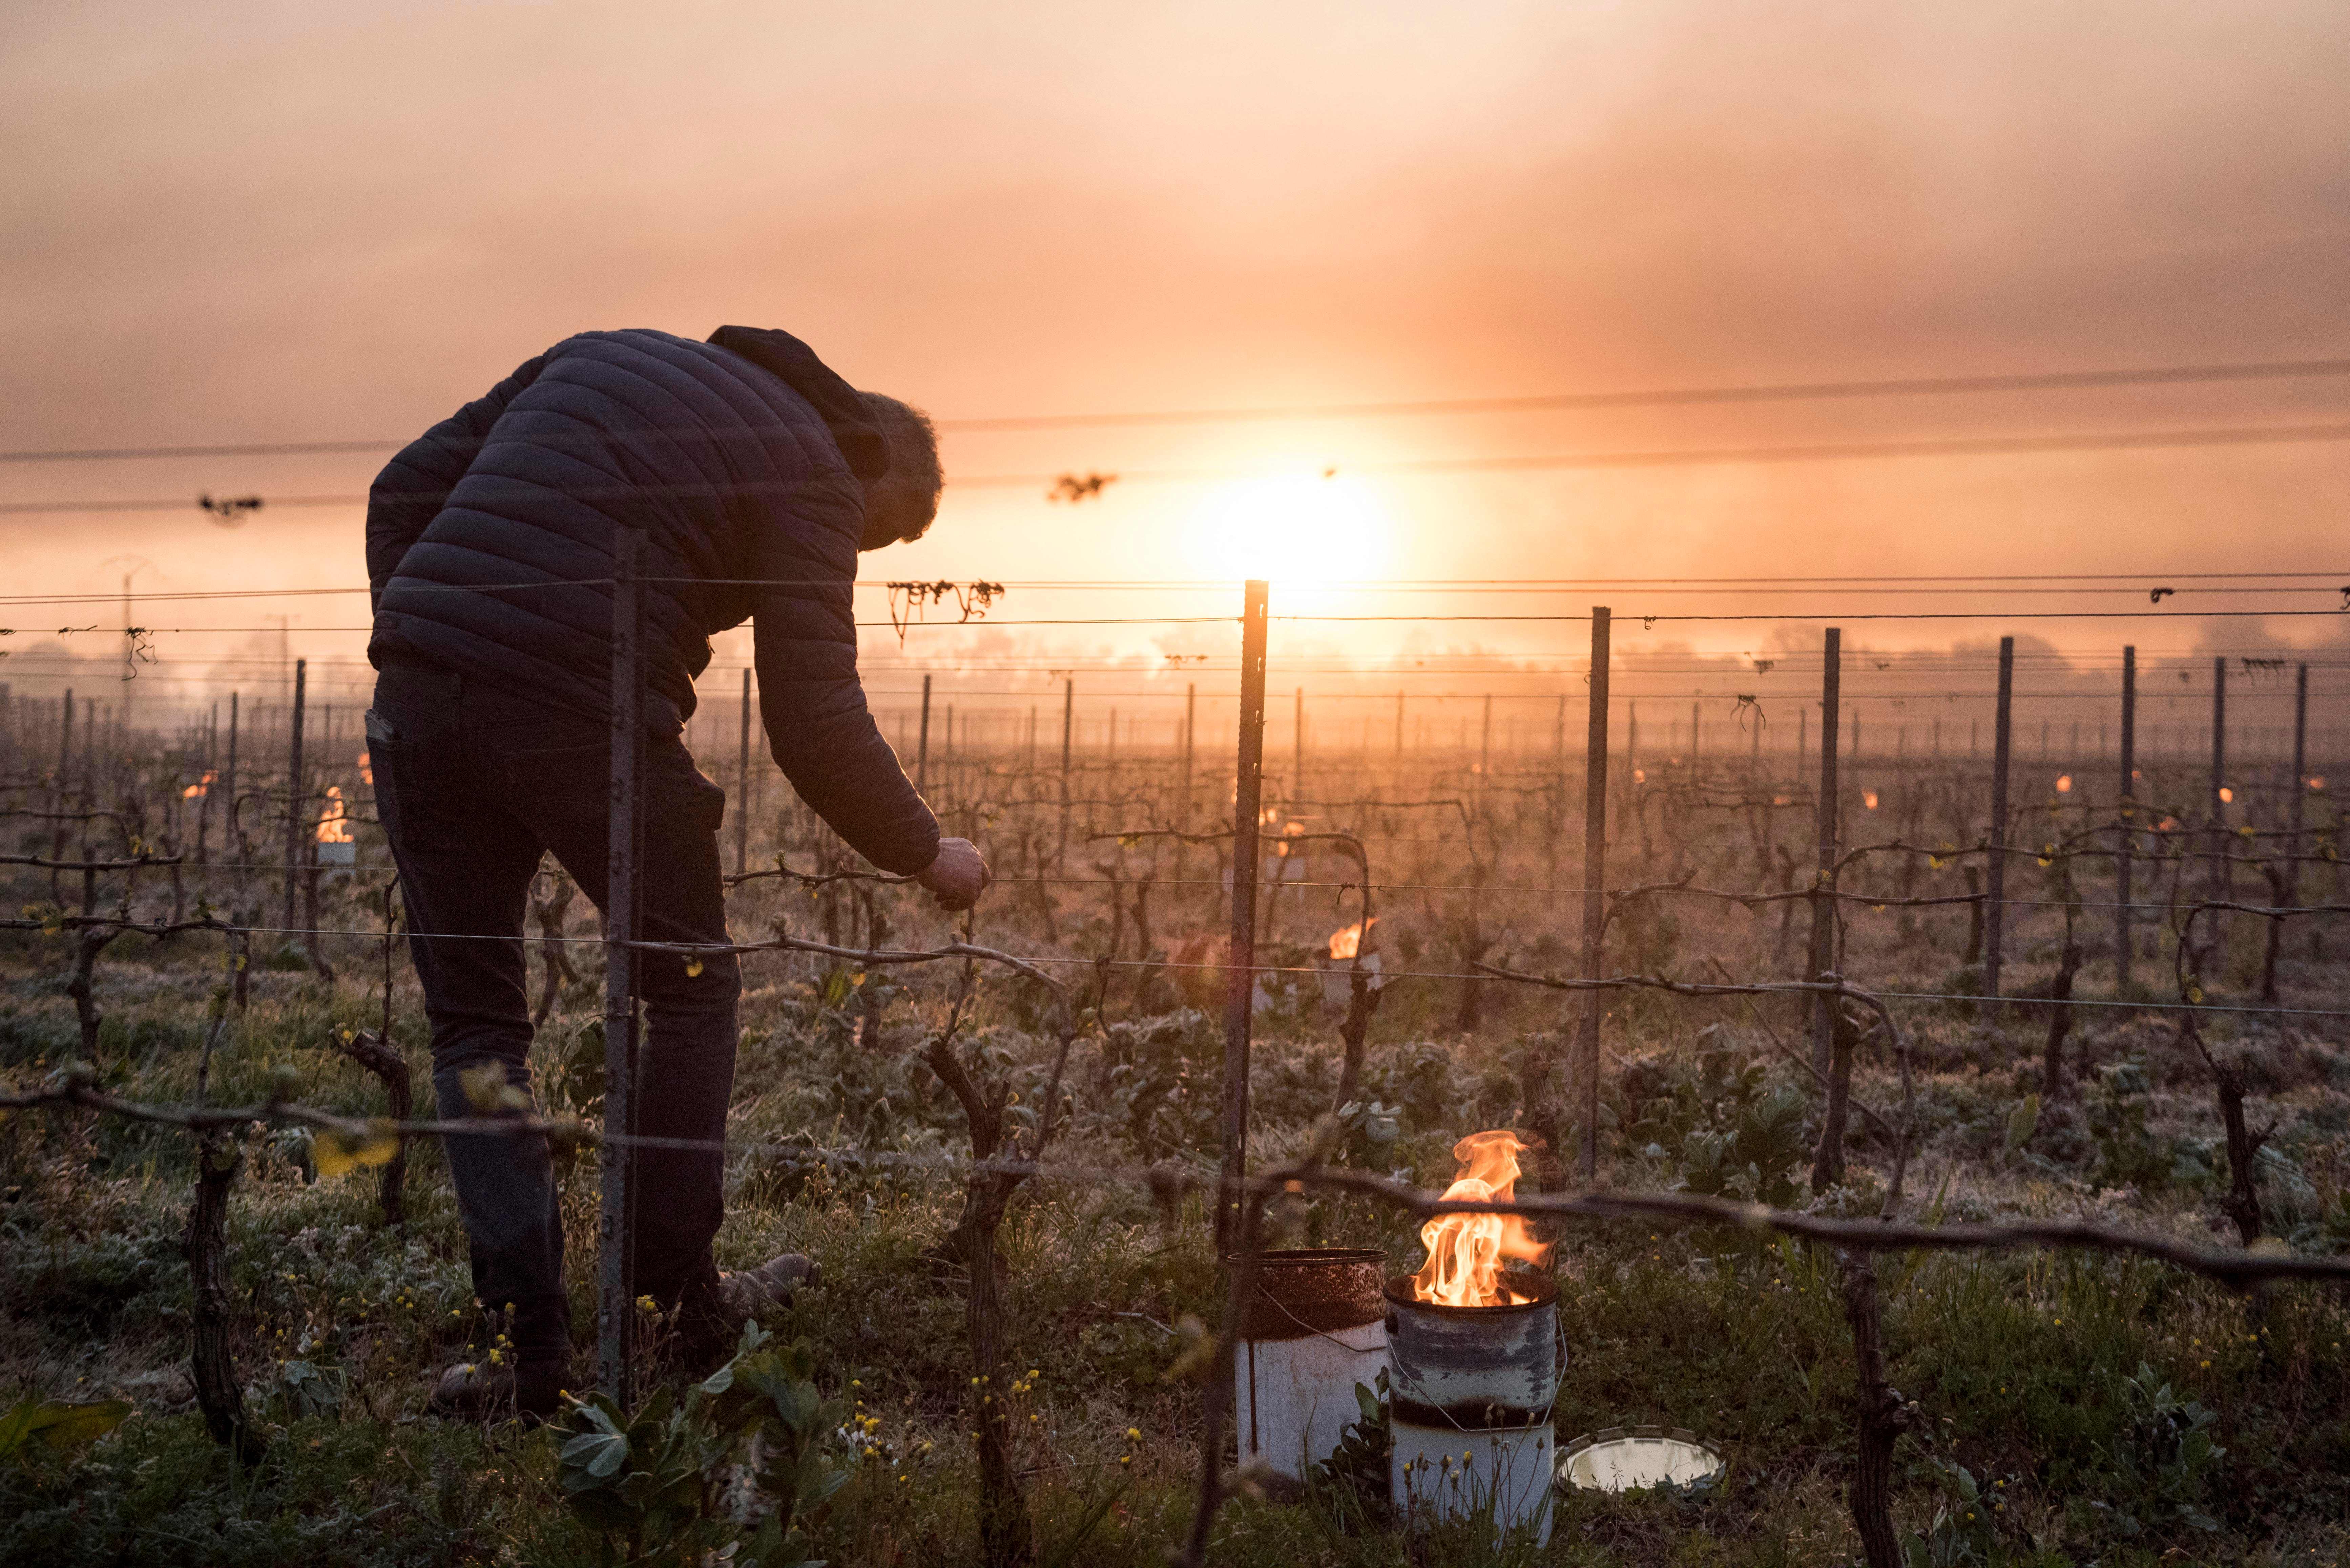 Winegrowers have even lit candels in the vineyards to try and warm up the vines